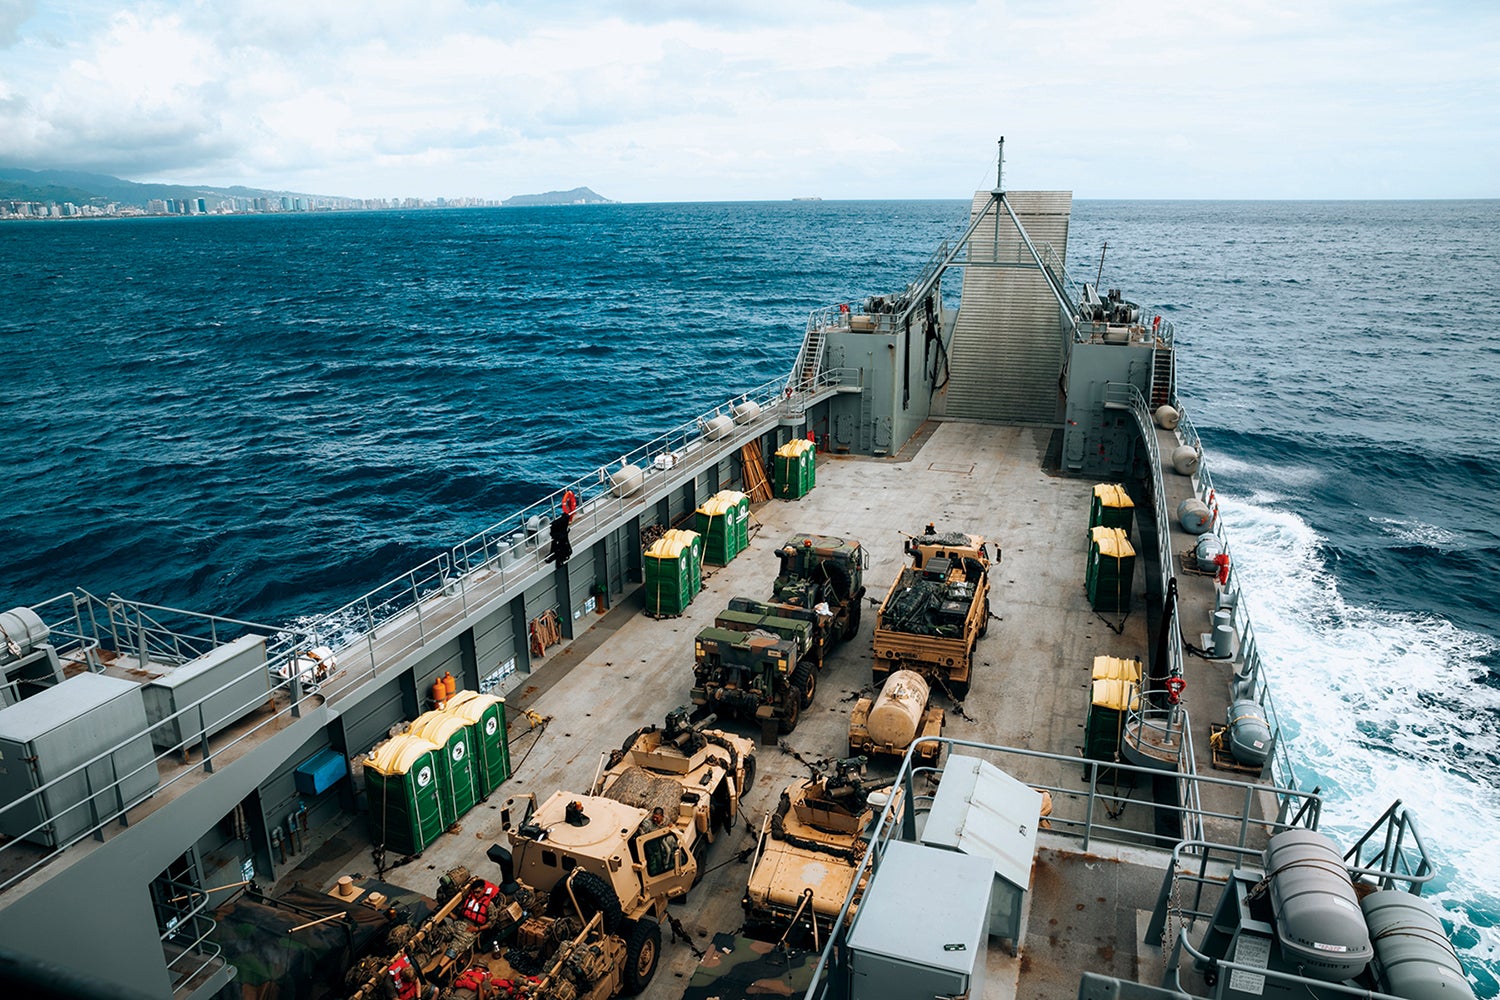 Soldiers with the 25th Infantry Division are transported aboard the U.S. Army Vessel General Brehon B. Somervell, a Logistics Support Vessel, off of Hawaii. (Credit: U.S. Army/Spc. Rachel Christensen)